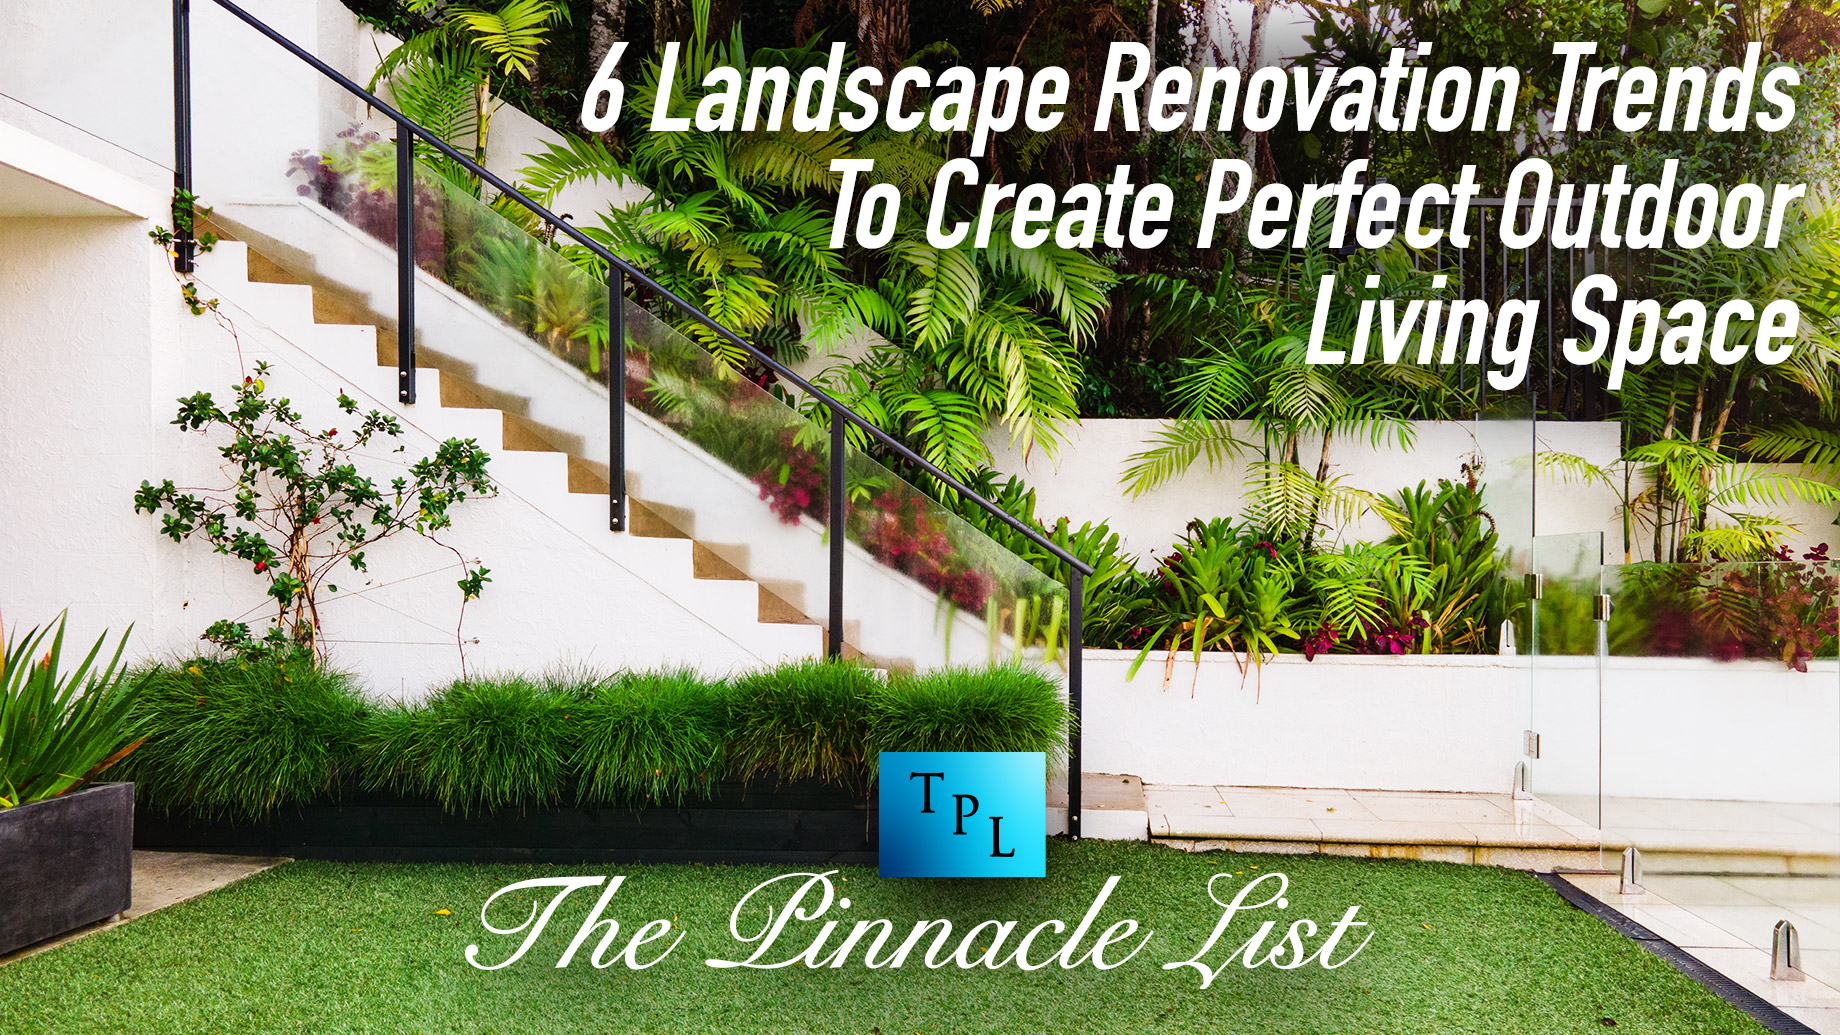 6 Landscape Renovation Trends To Create Perfect Outdoor Living Space